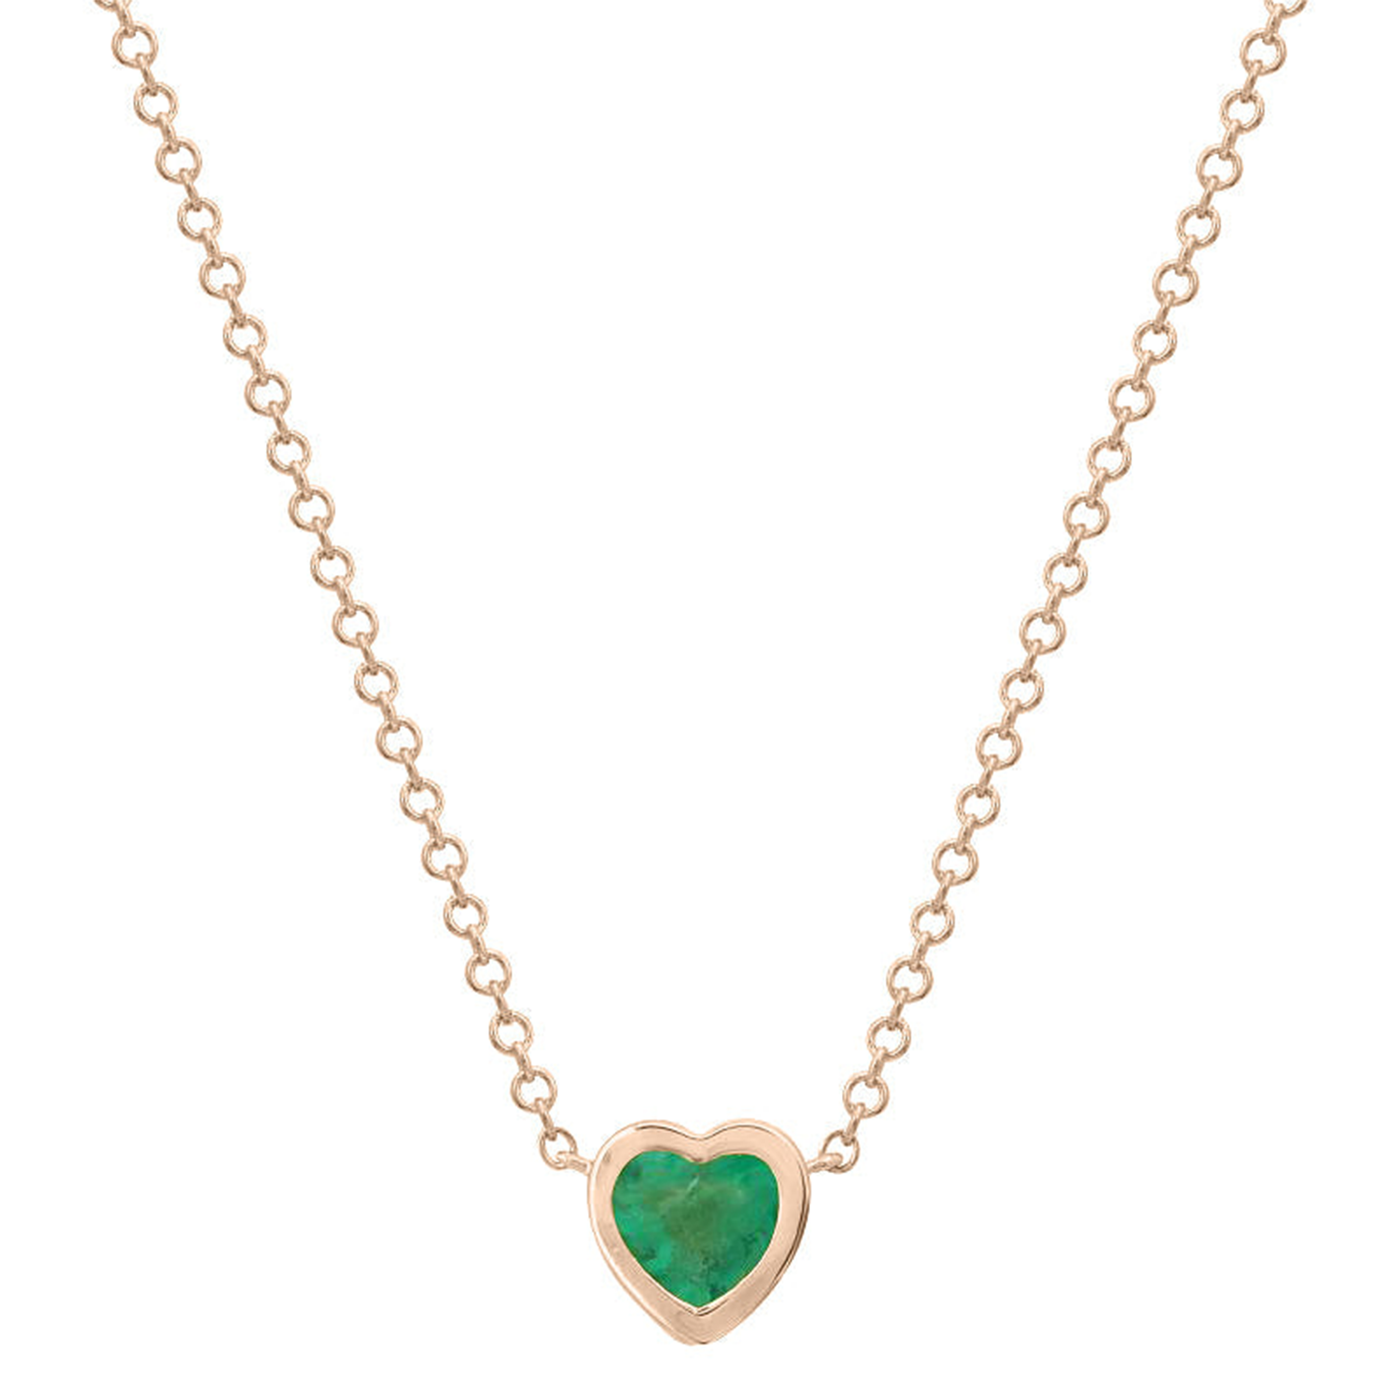 Bezel Heart Necklace with Colored Stone